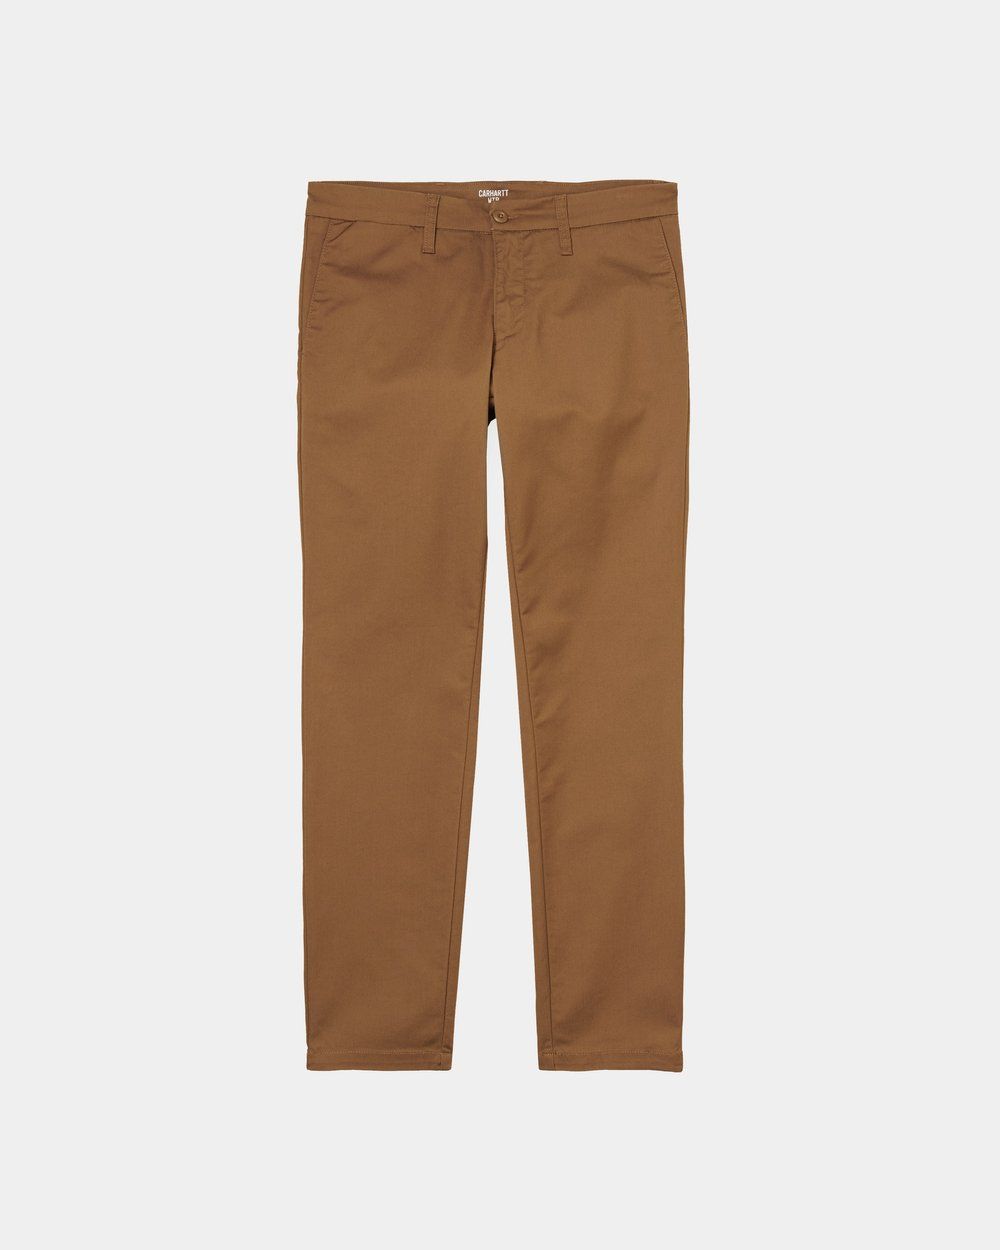 Product Image for Sid Pant, Hamilton Brown Rinsed